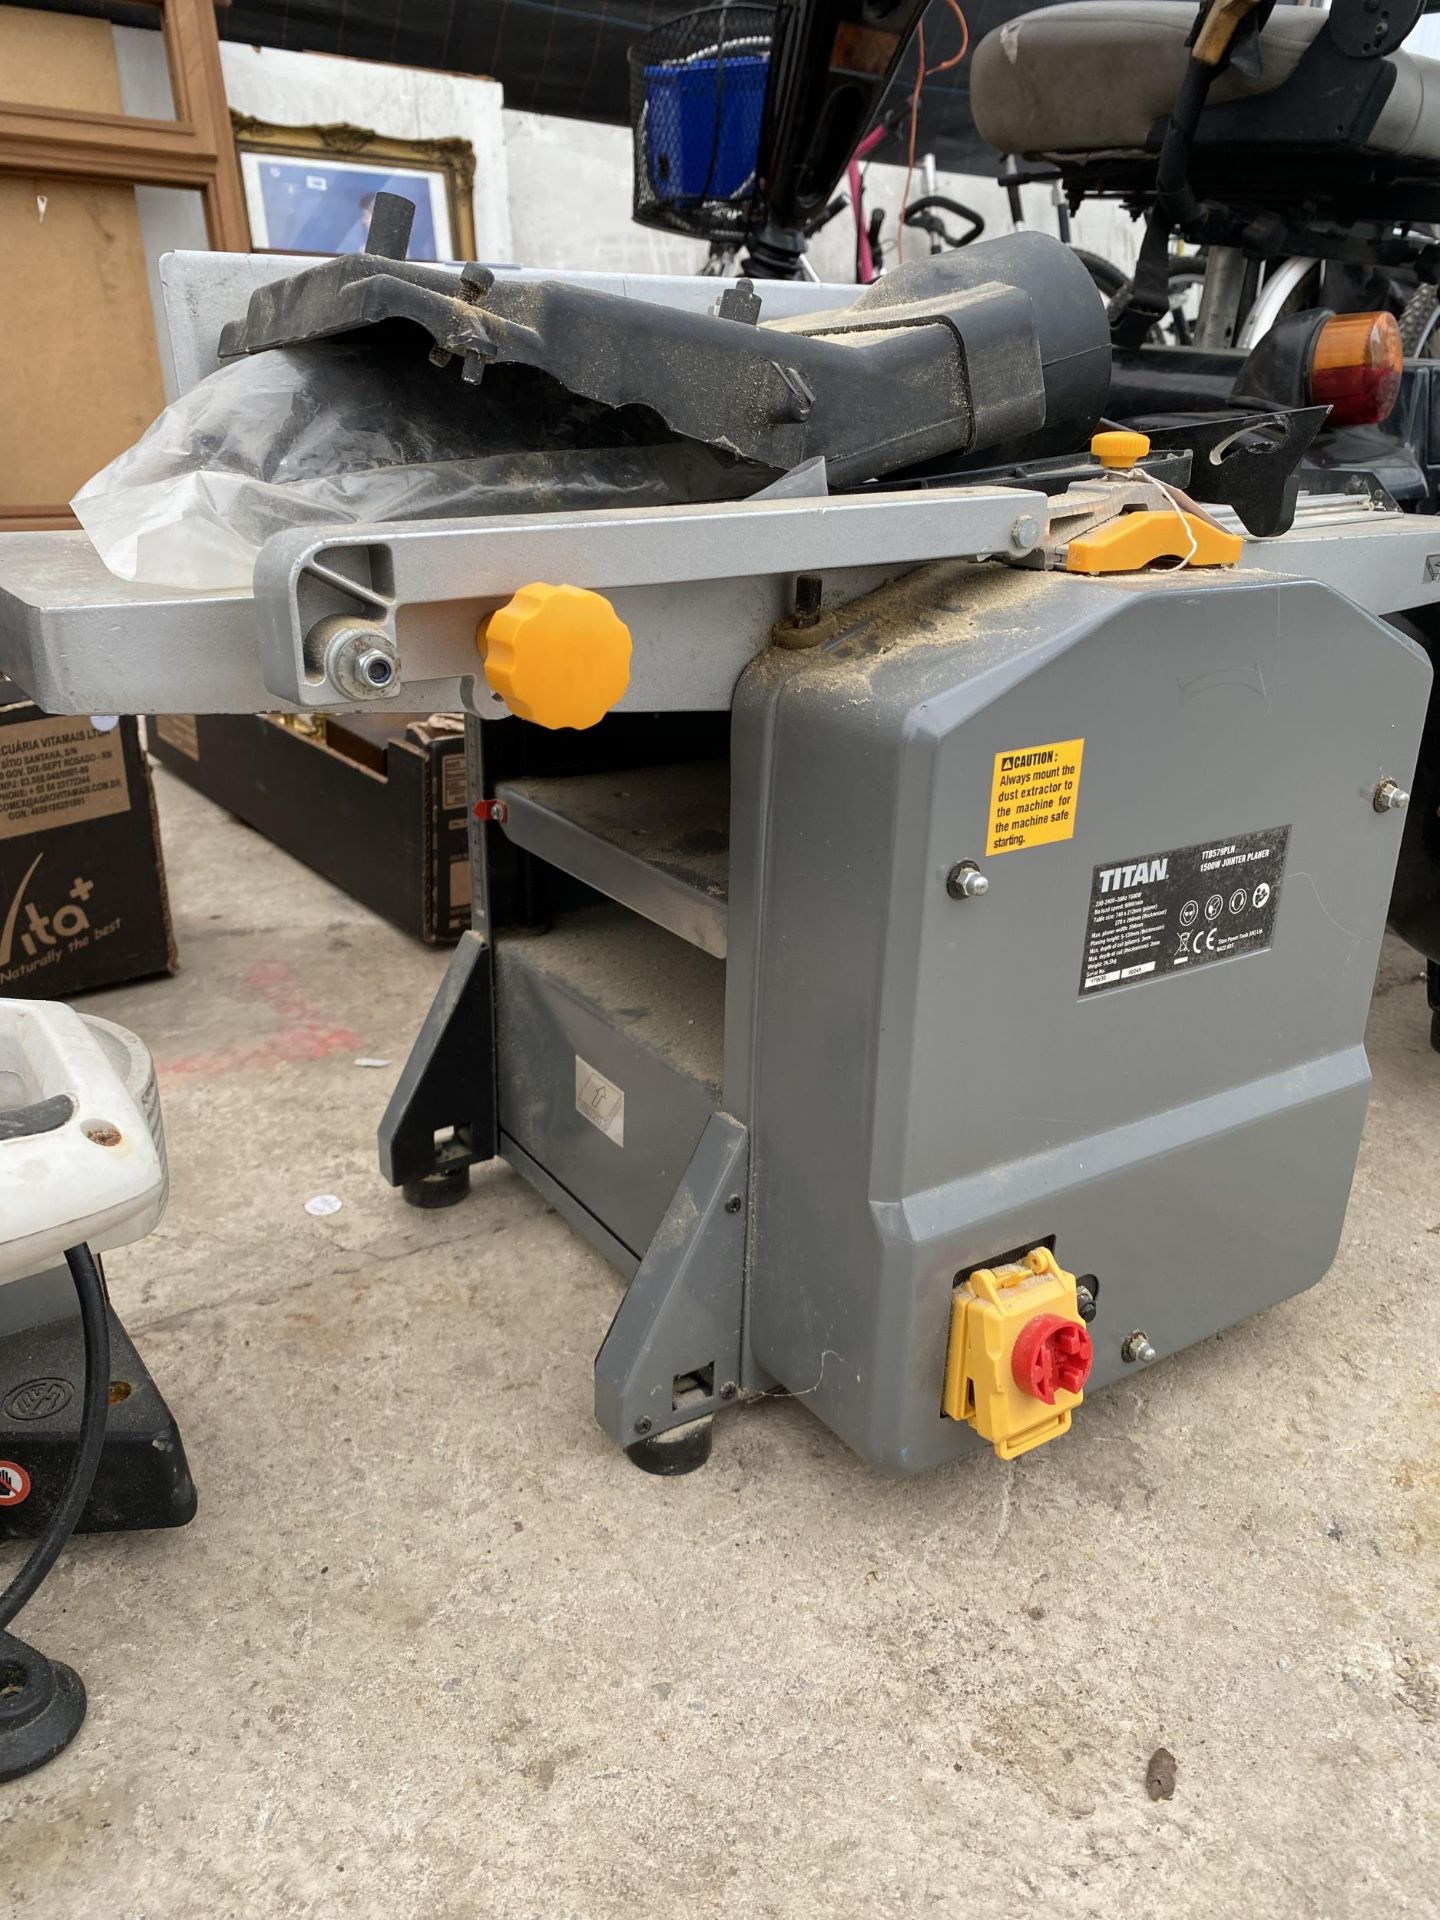 A TITAN JOINTER PLANER BELIEVED IN WORKING ORDER BUT NO WARRANTY - Image 2 of 2